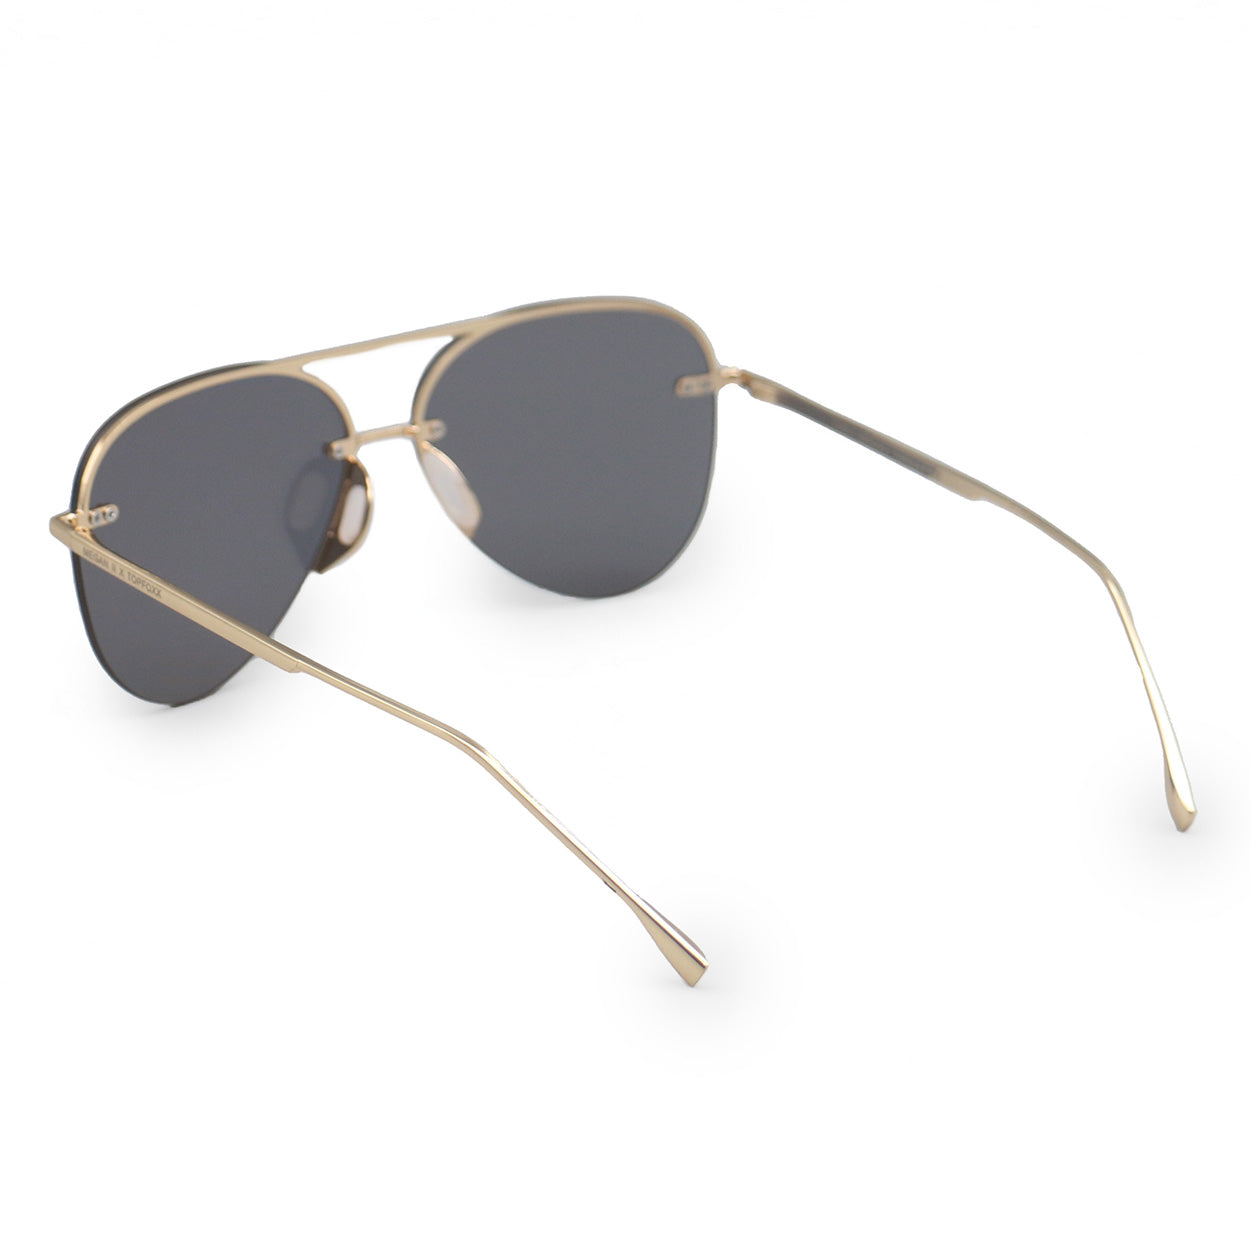 White background back image of classic aviators with no nosepad and mirrored gold lenses with metal detailing